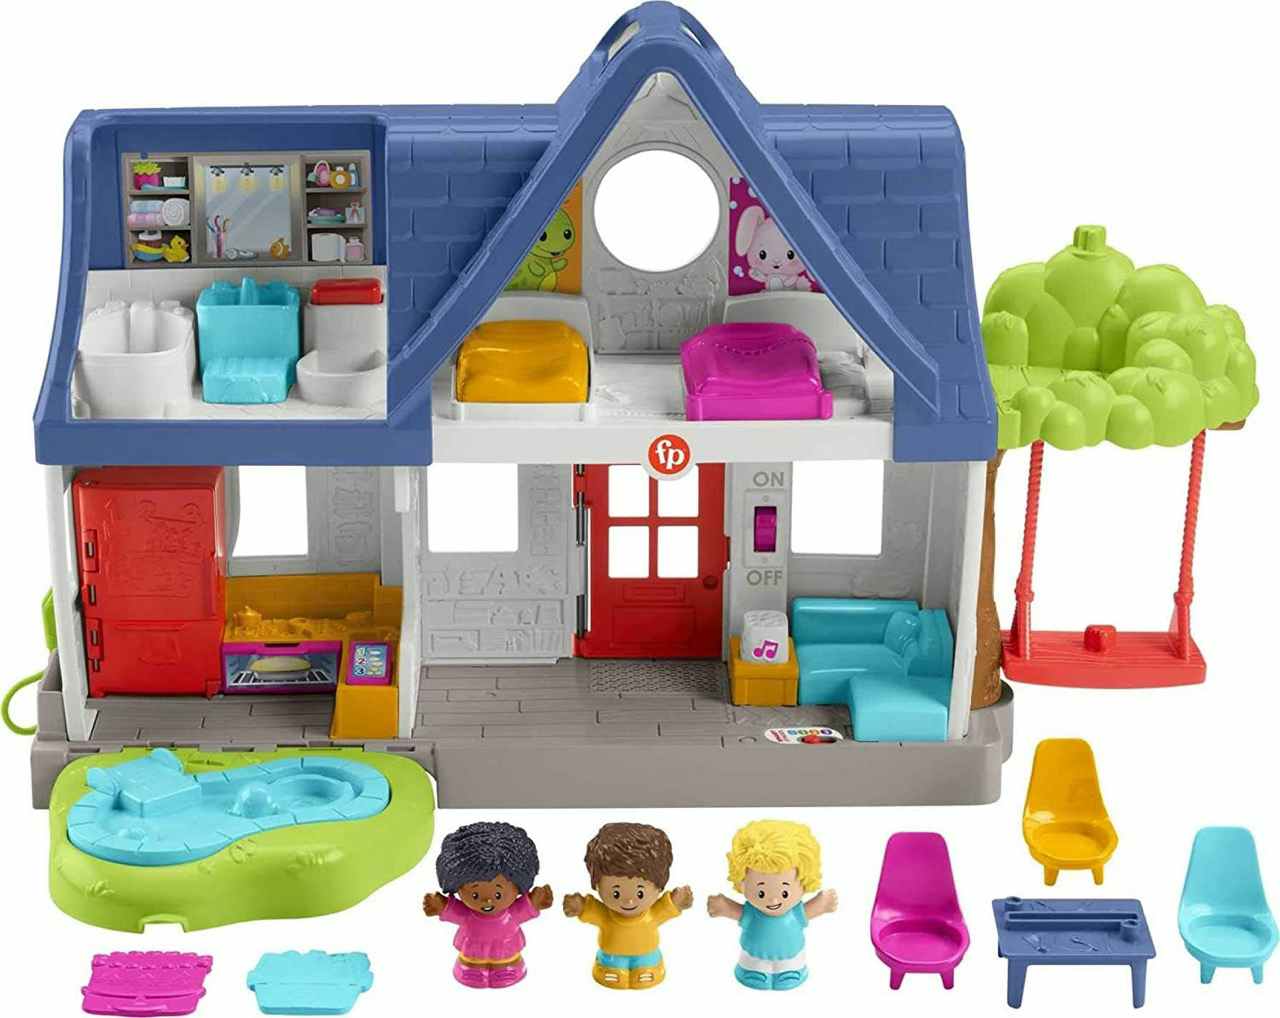 A Fisher-Price Little People Play House on a white background